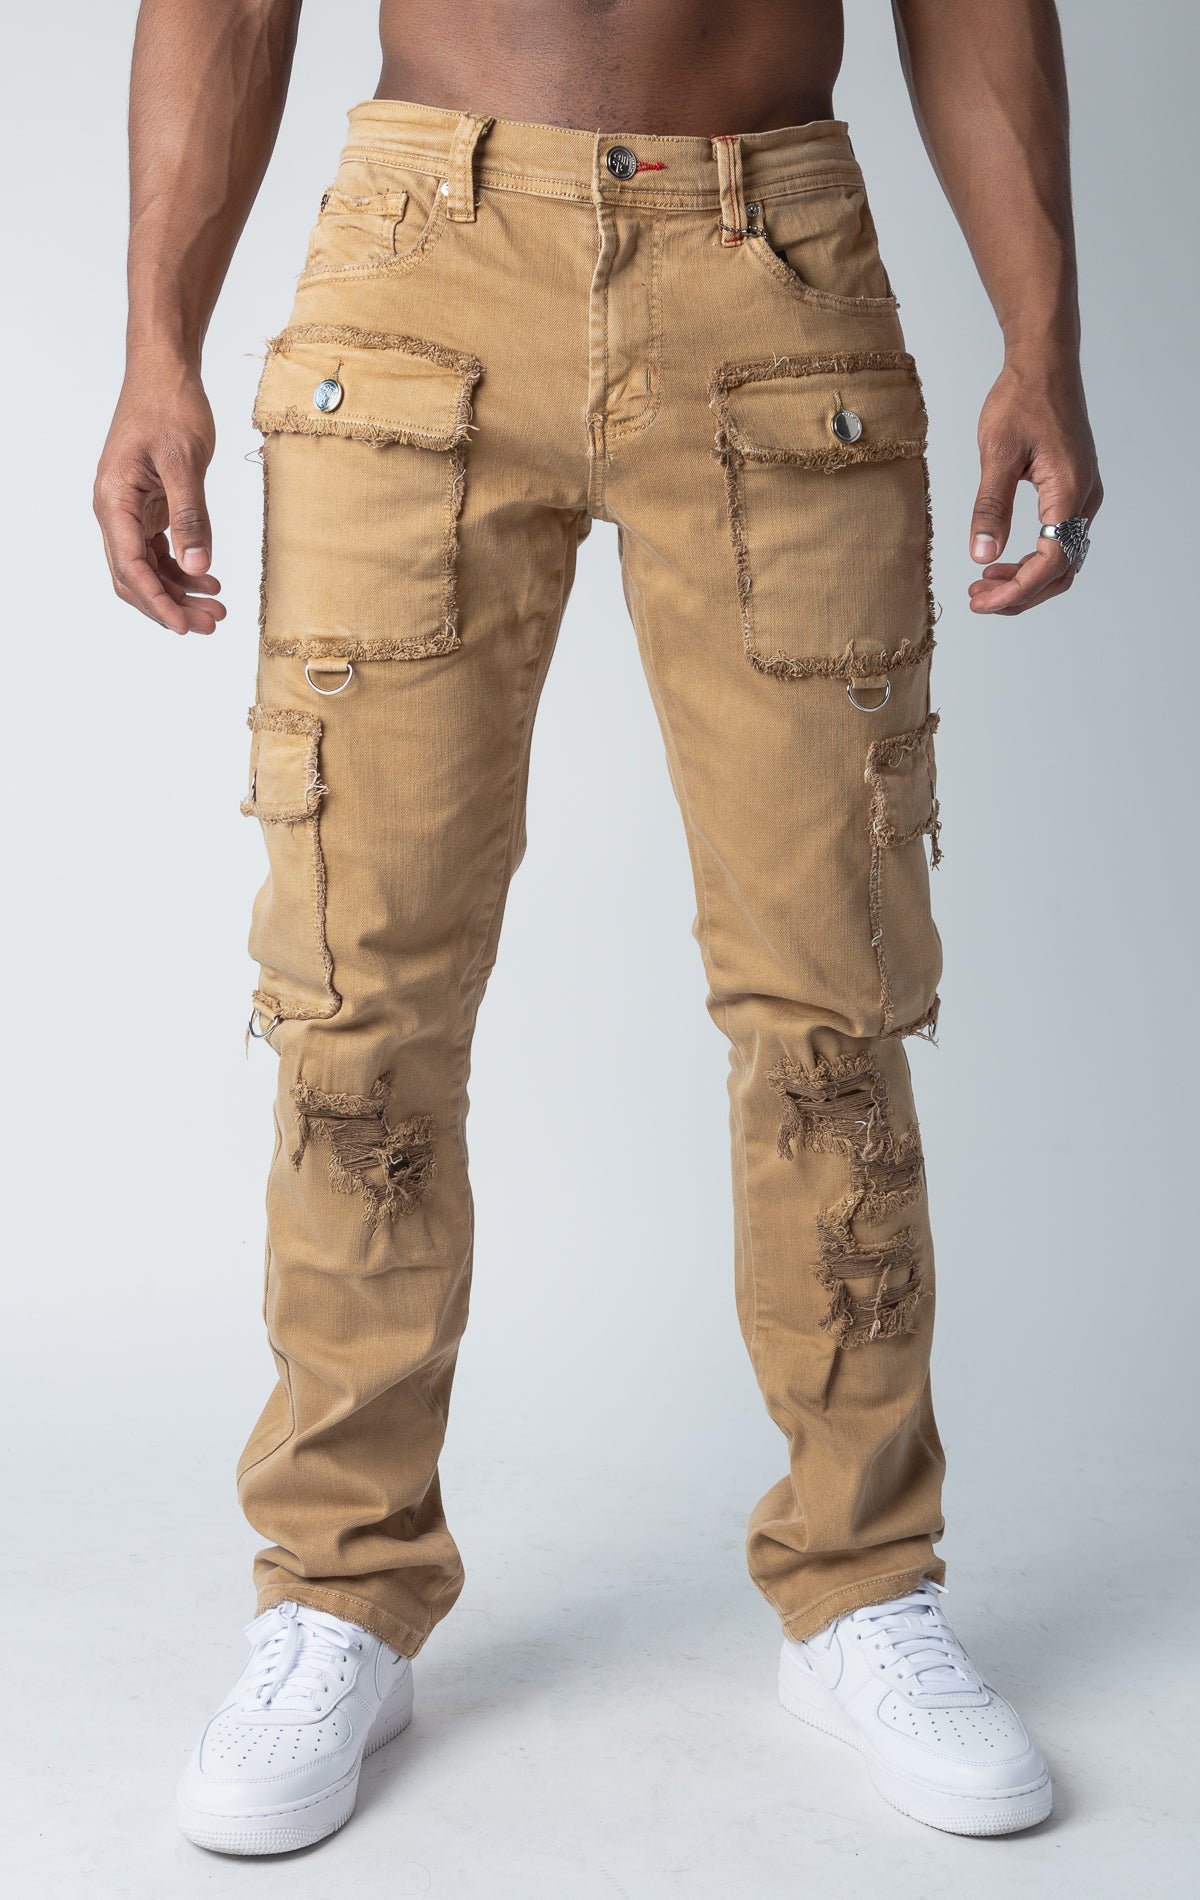 Slim fit, stretch denim cargo jeans with multiple pockets, distressed detailing at the edges, and reinforced stitching.